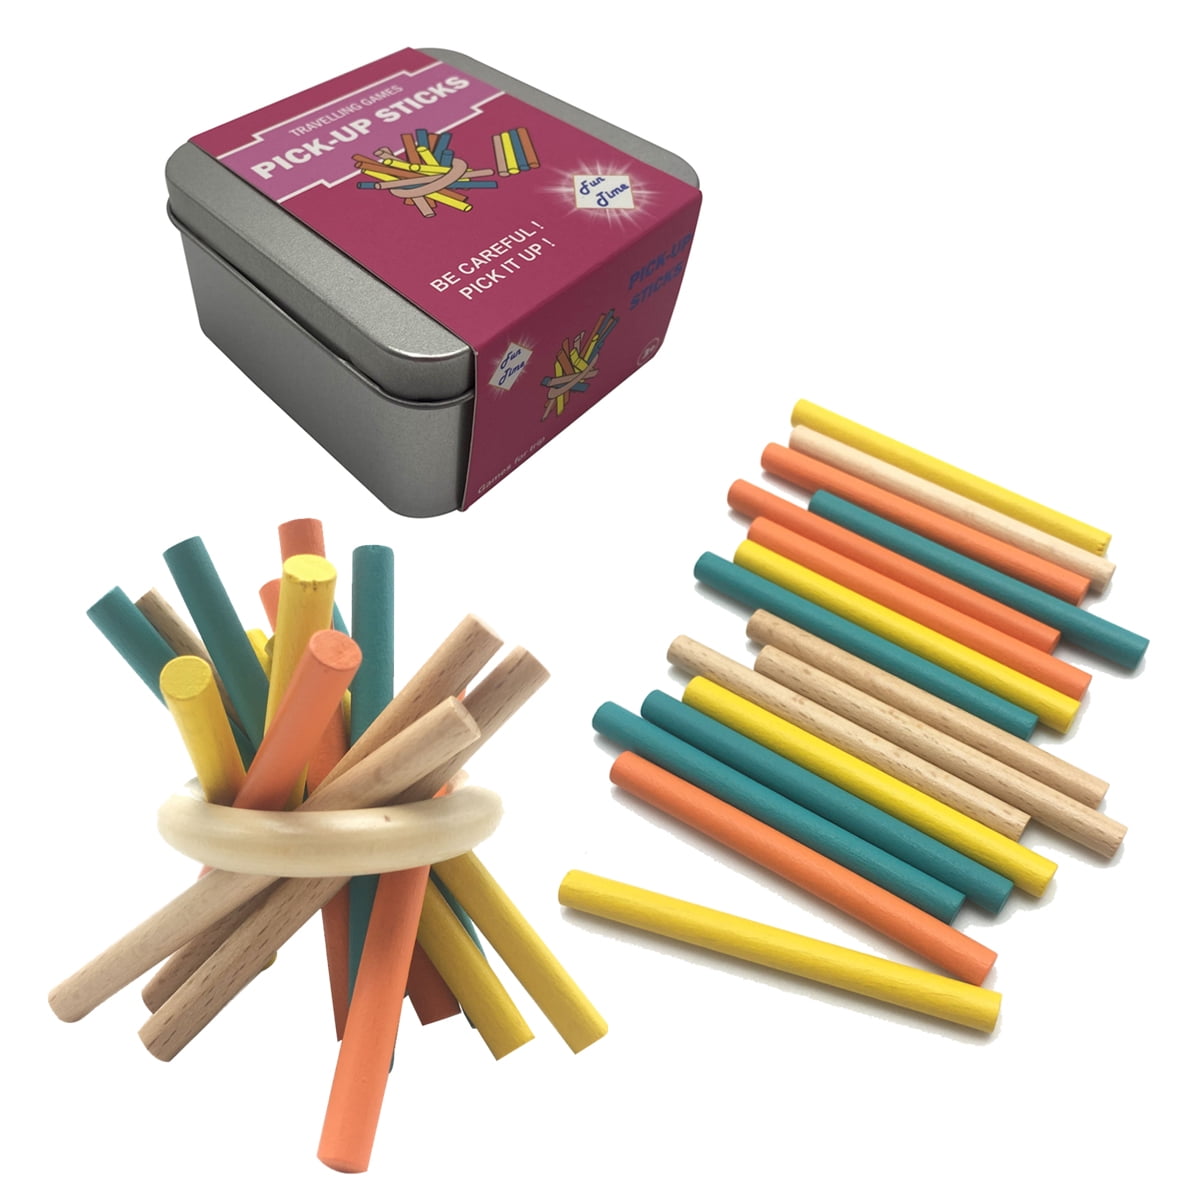 Pick Up Sticks Educational Toys Wooden Toys for Kids Travel Games, Size: Standard